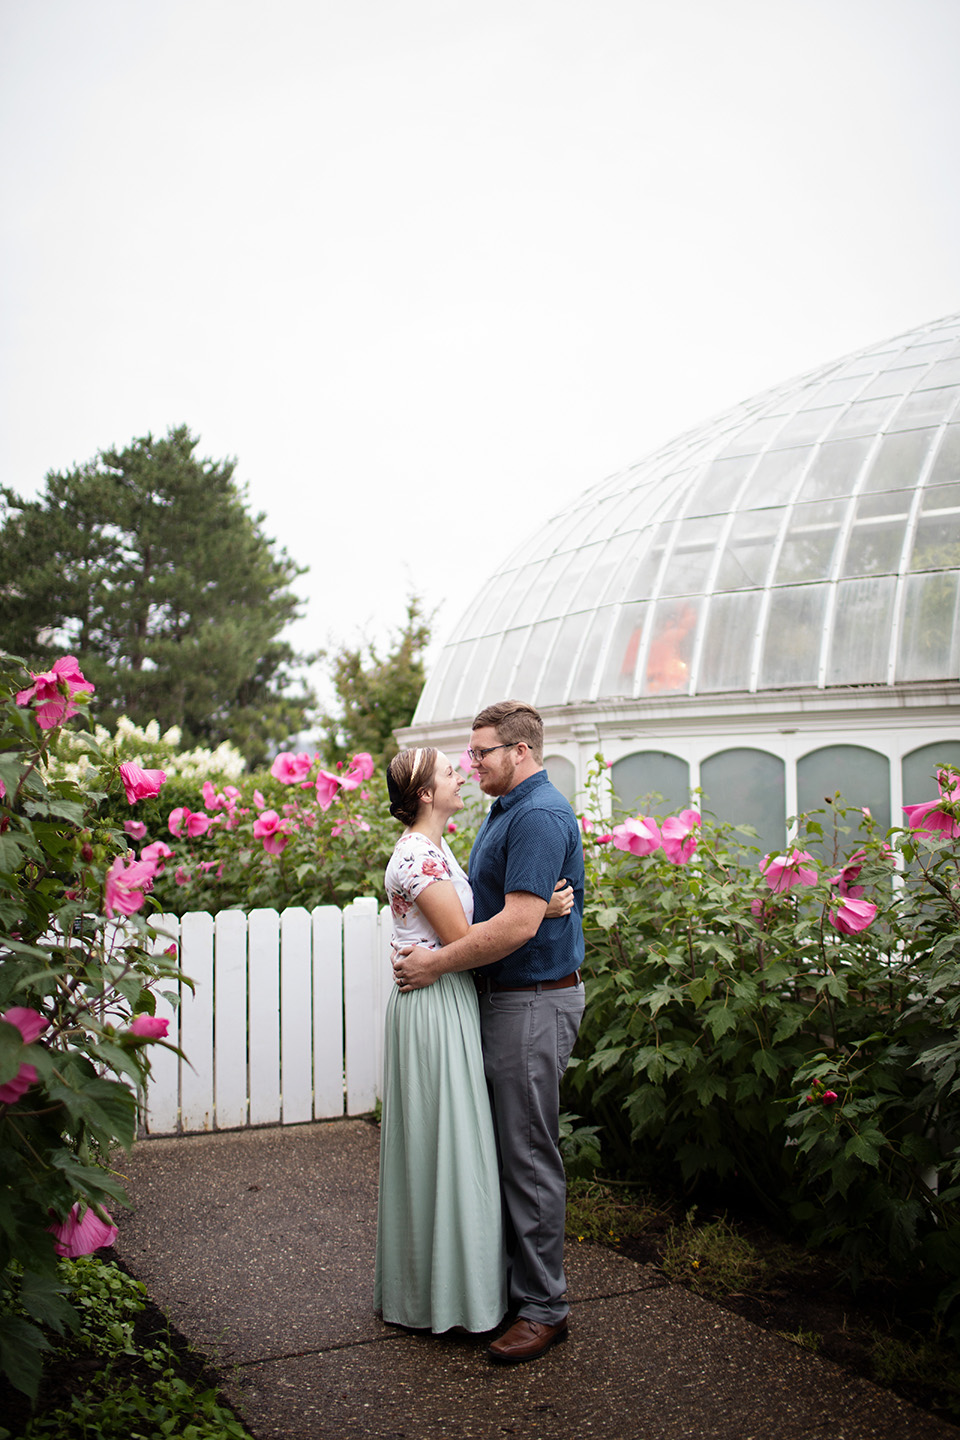 PHIPPS CONSERVATORY ENGAGEMENT PHOTO SESSION-PITTSBURGH, PA-LORENE+DUANE- 03